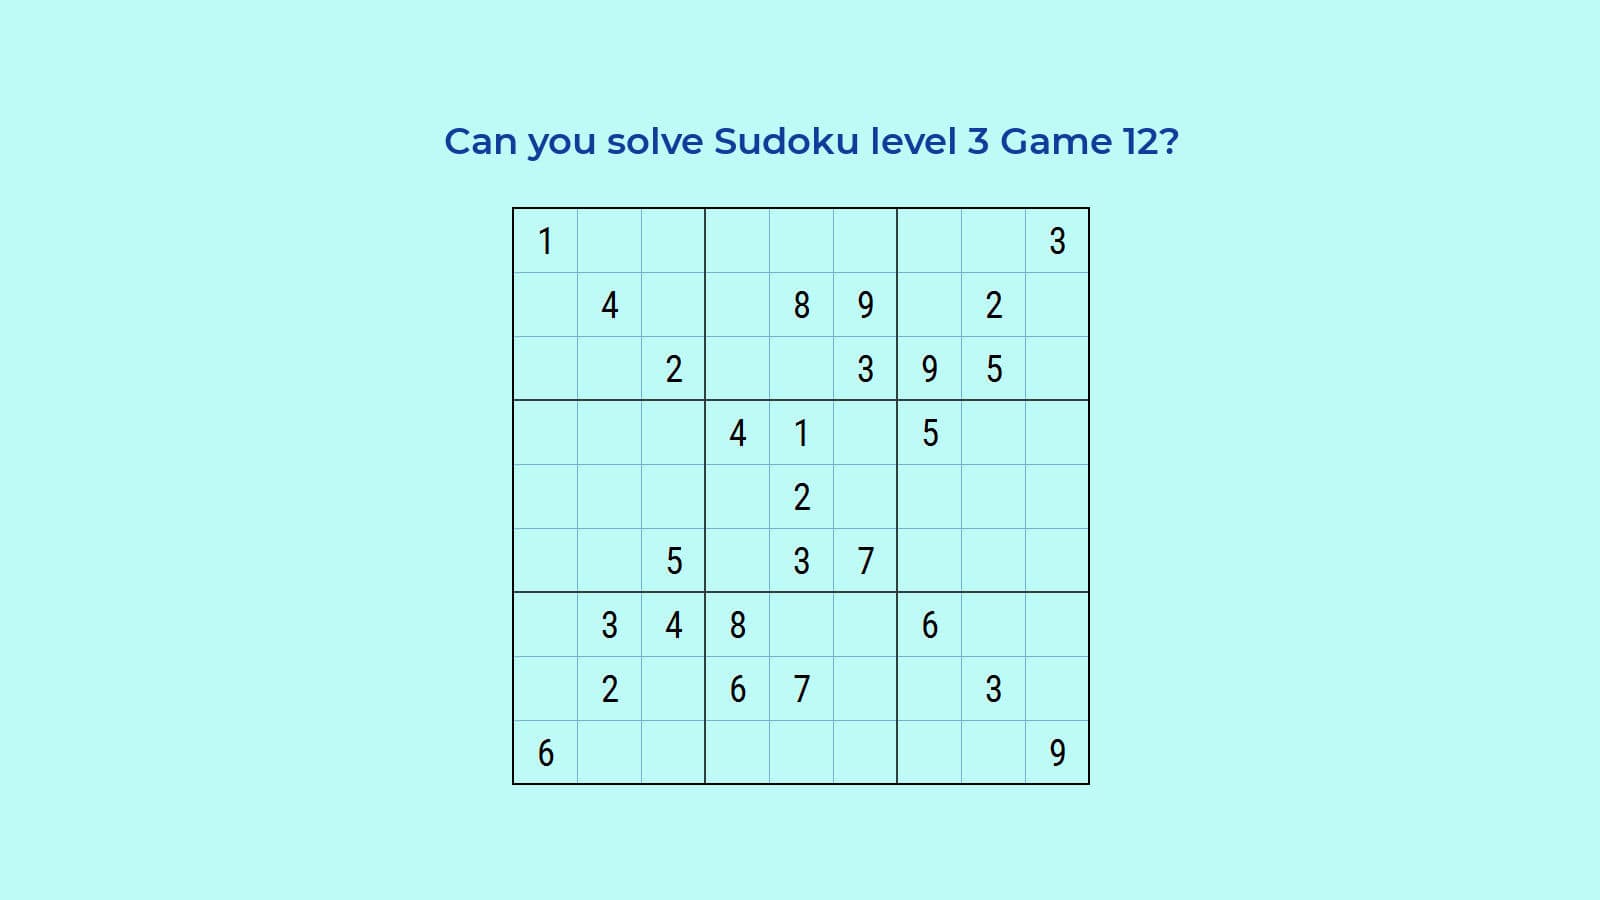 How To Solve Sudoku Hard Level 3 Game 12 Quickly